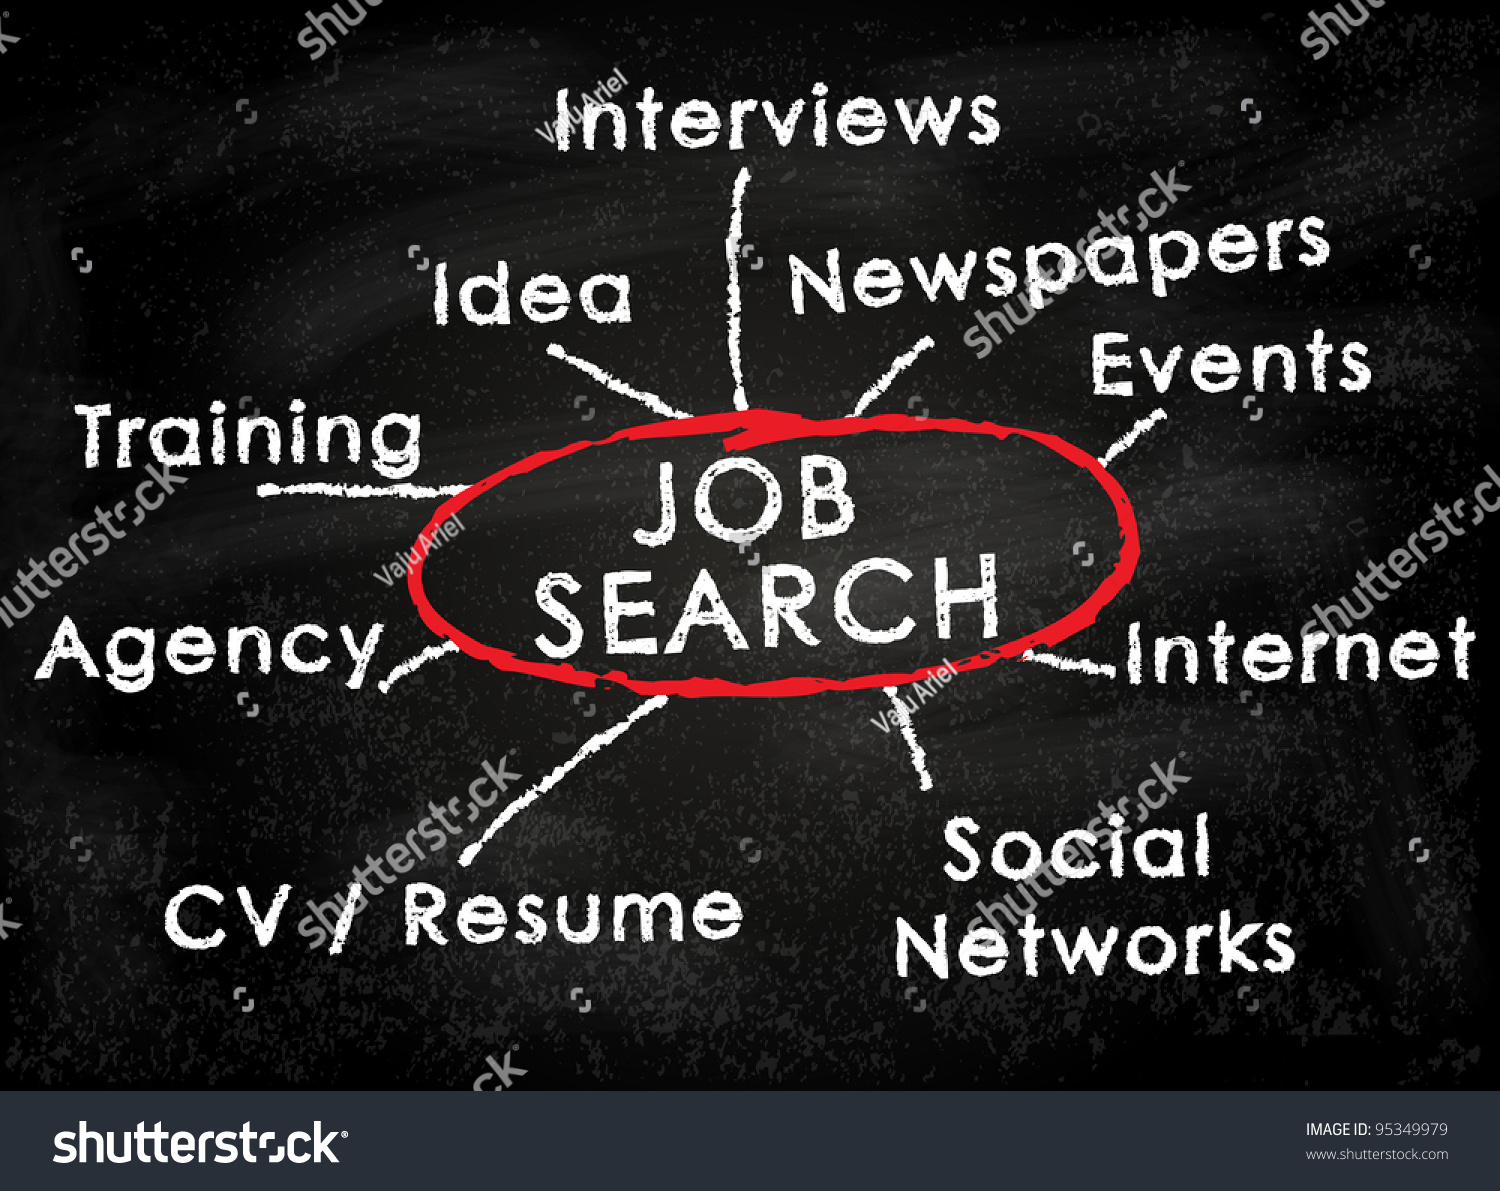 conceptual job search resources   interviews  idea  newspapers  events  agency  cv  resume